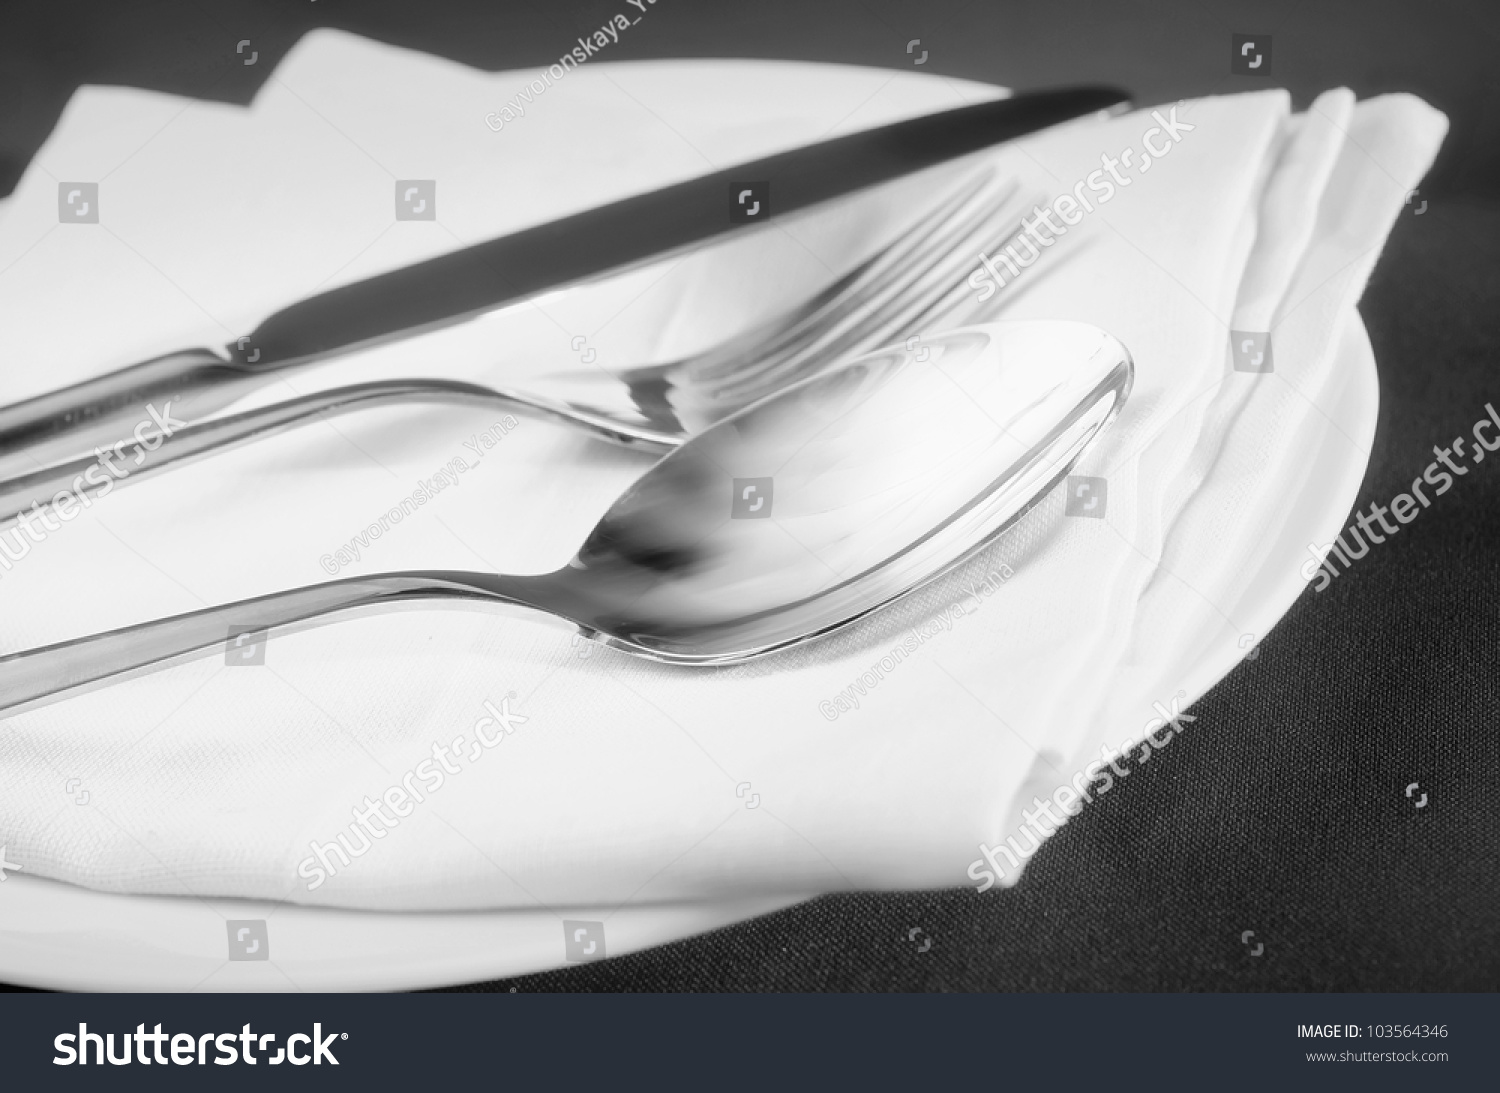 spoon, fork and knife on white plate #103564346